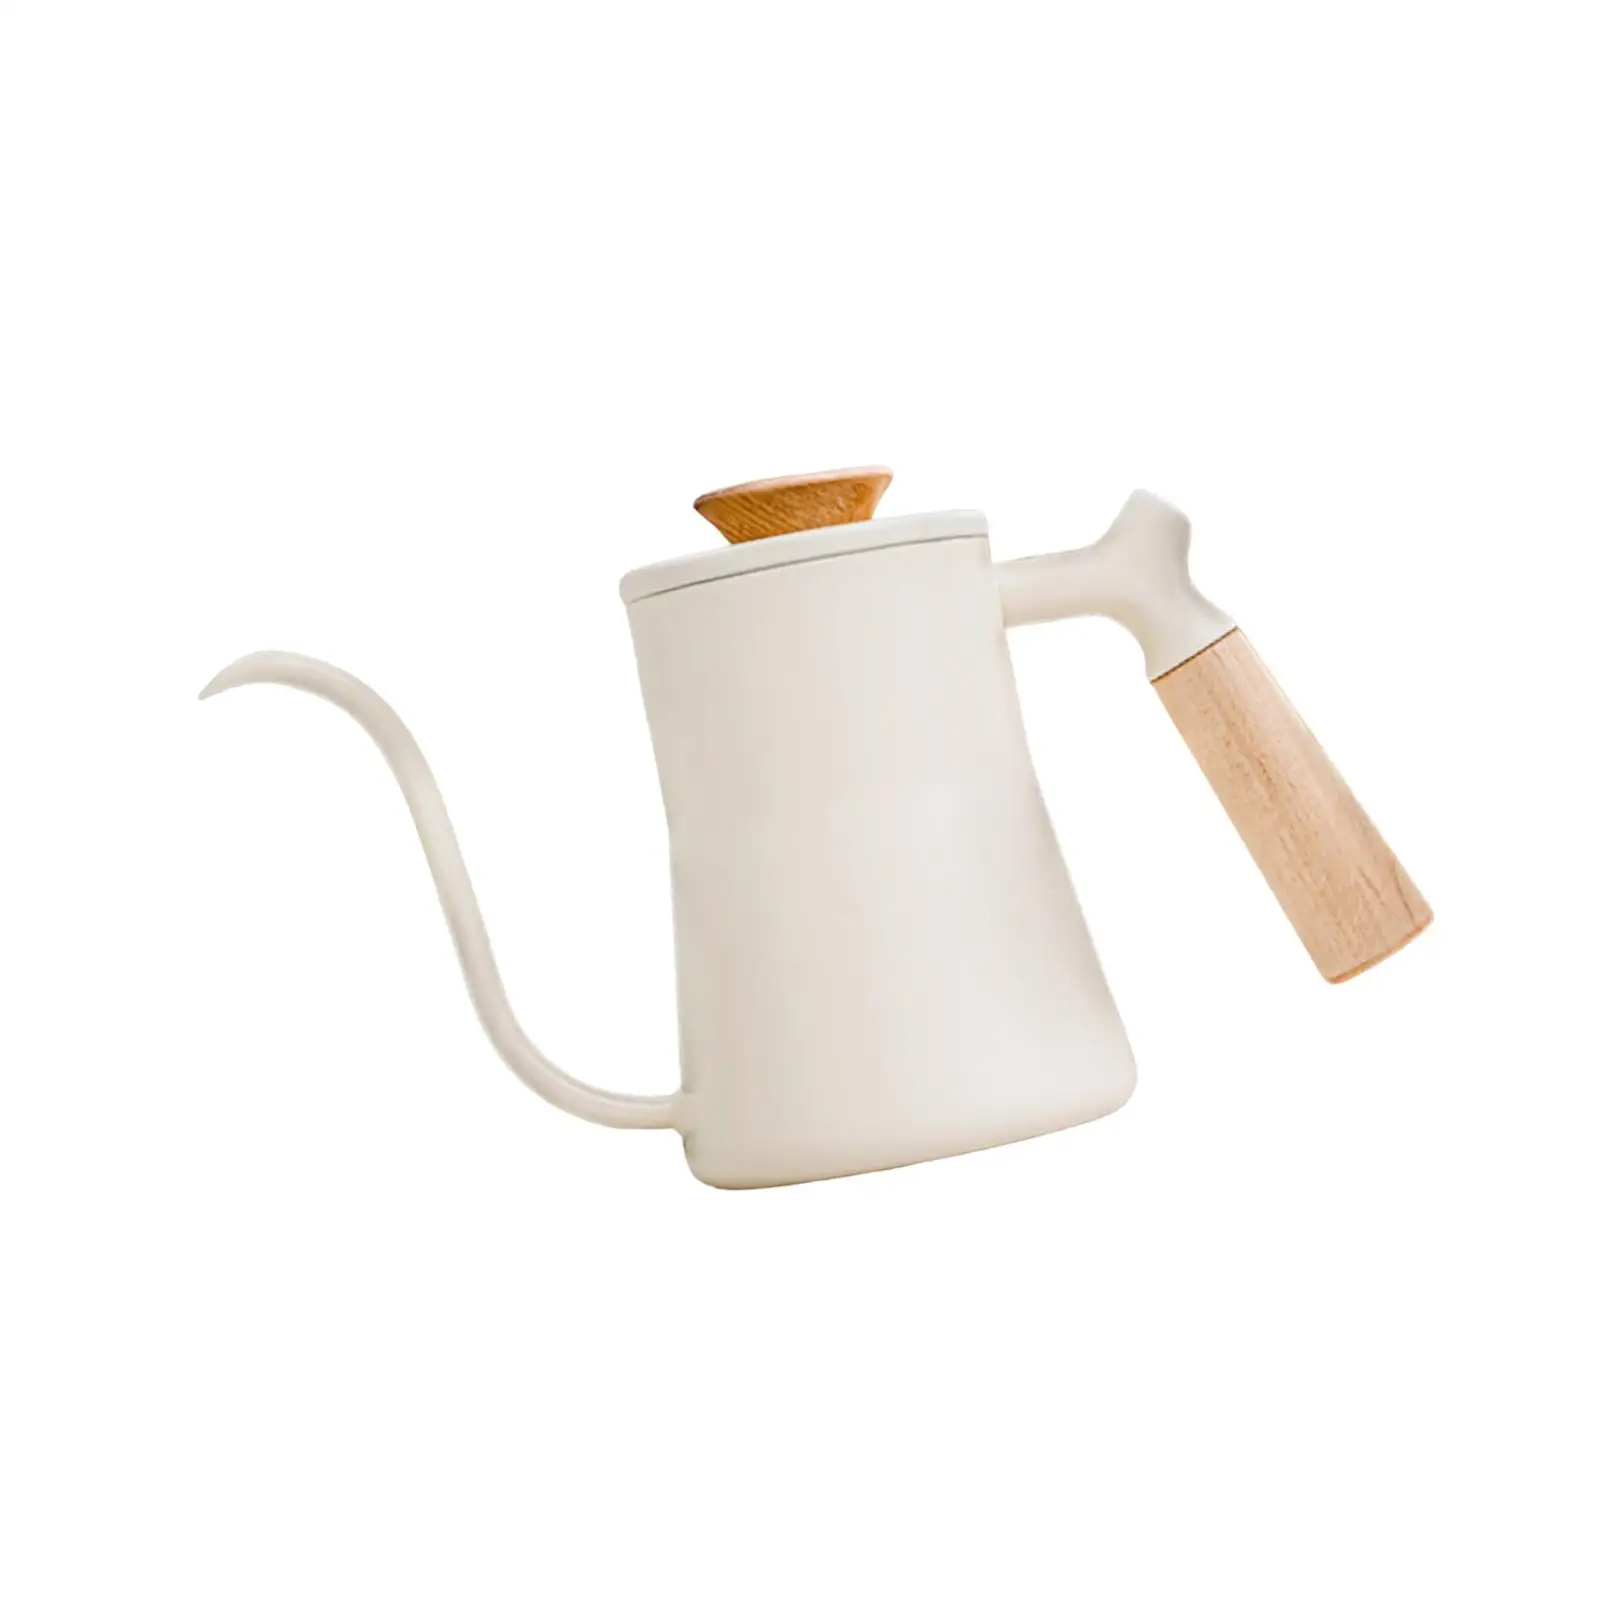 Gooseneck Pour over Coffee Kettle Wooden Handle 550ml with Lid Gooseneck Tea Kettle for Pour over Coffee and Tea All Stove Tops